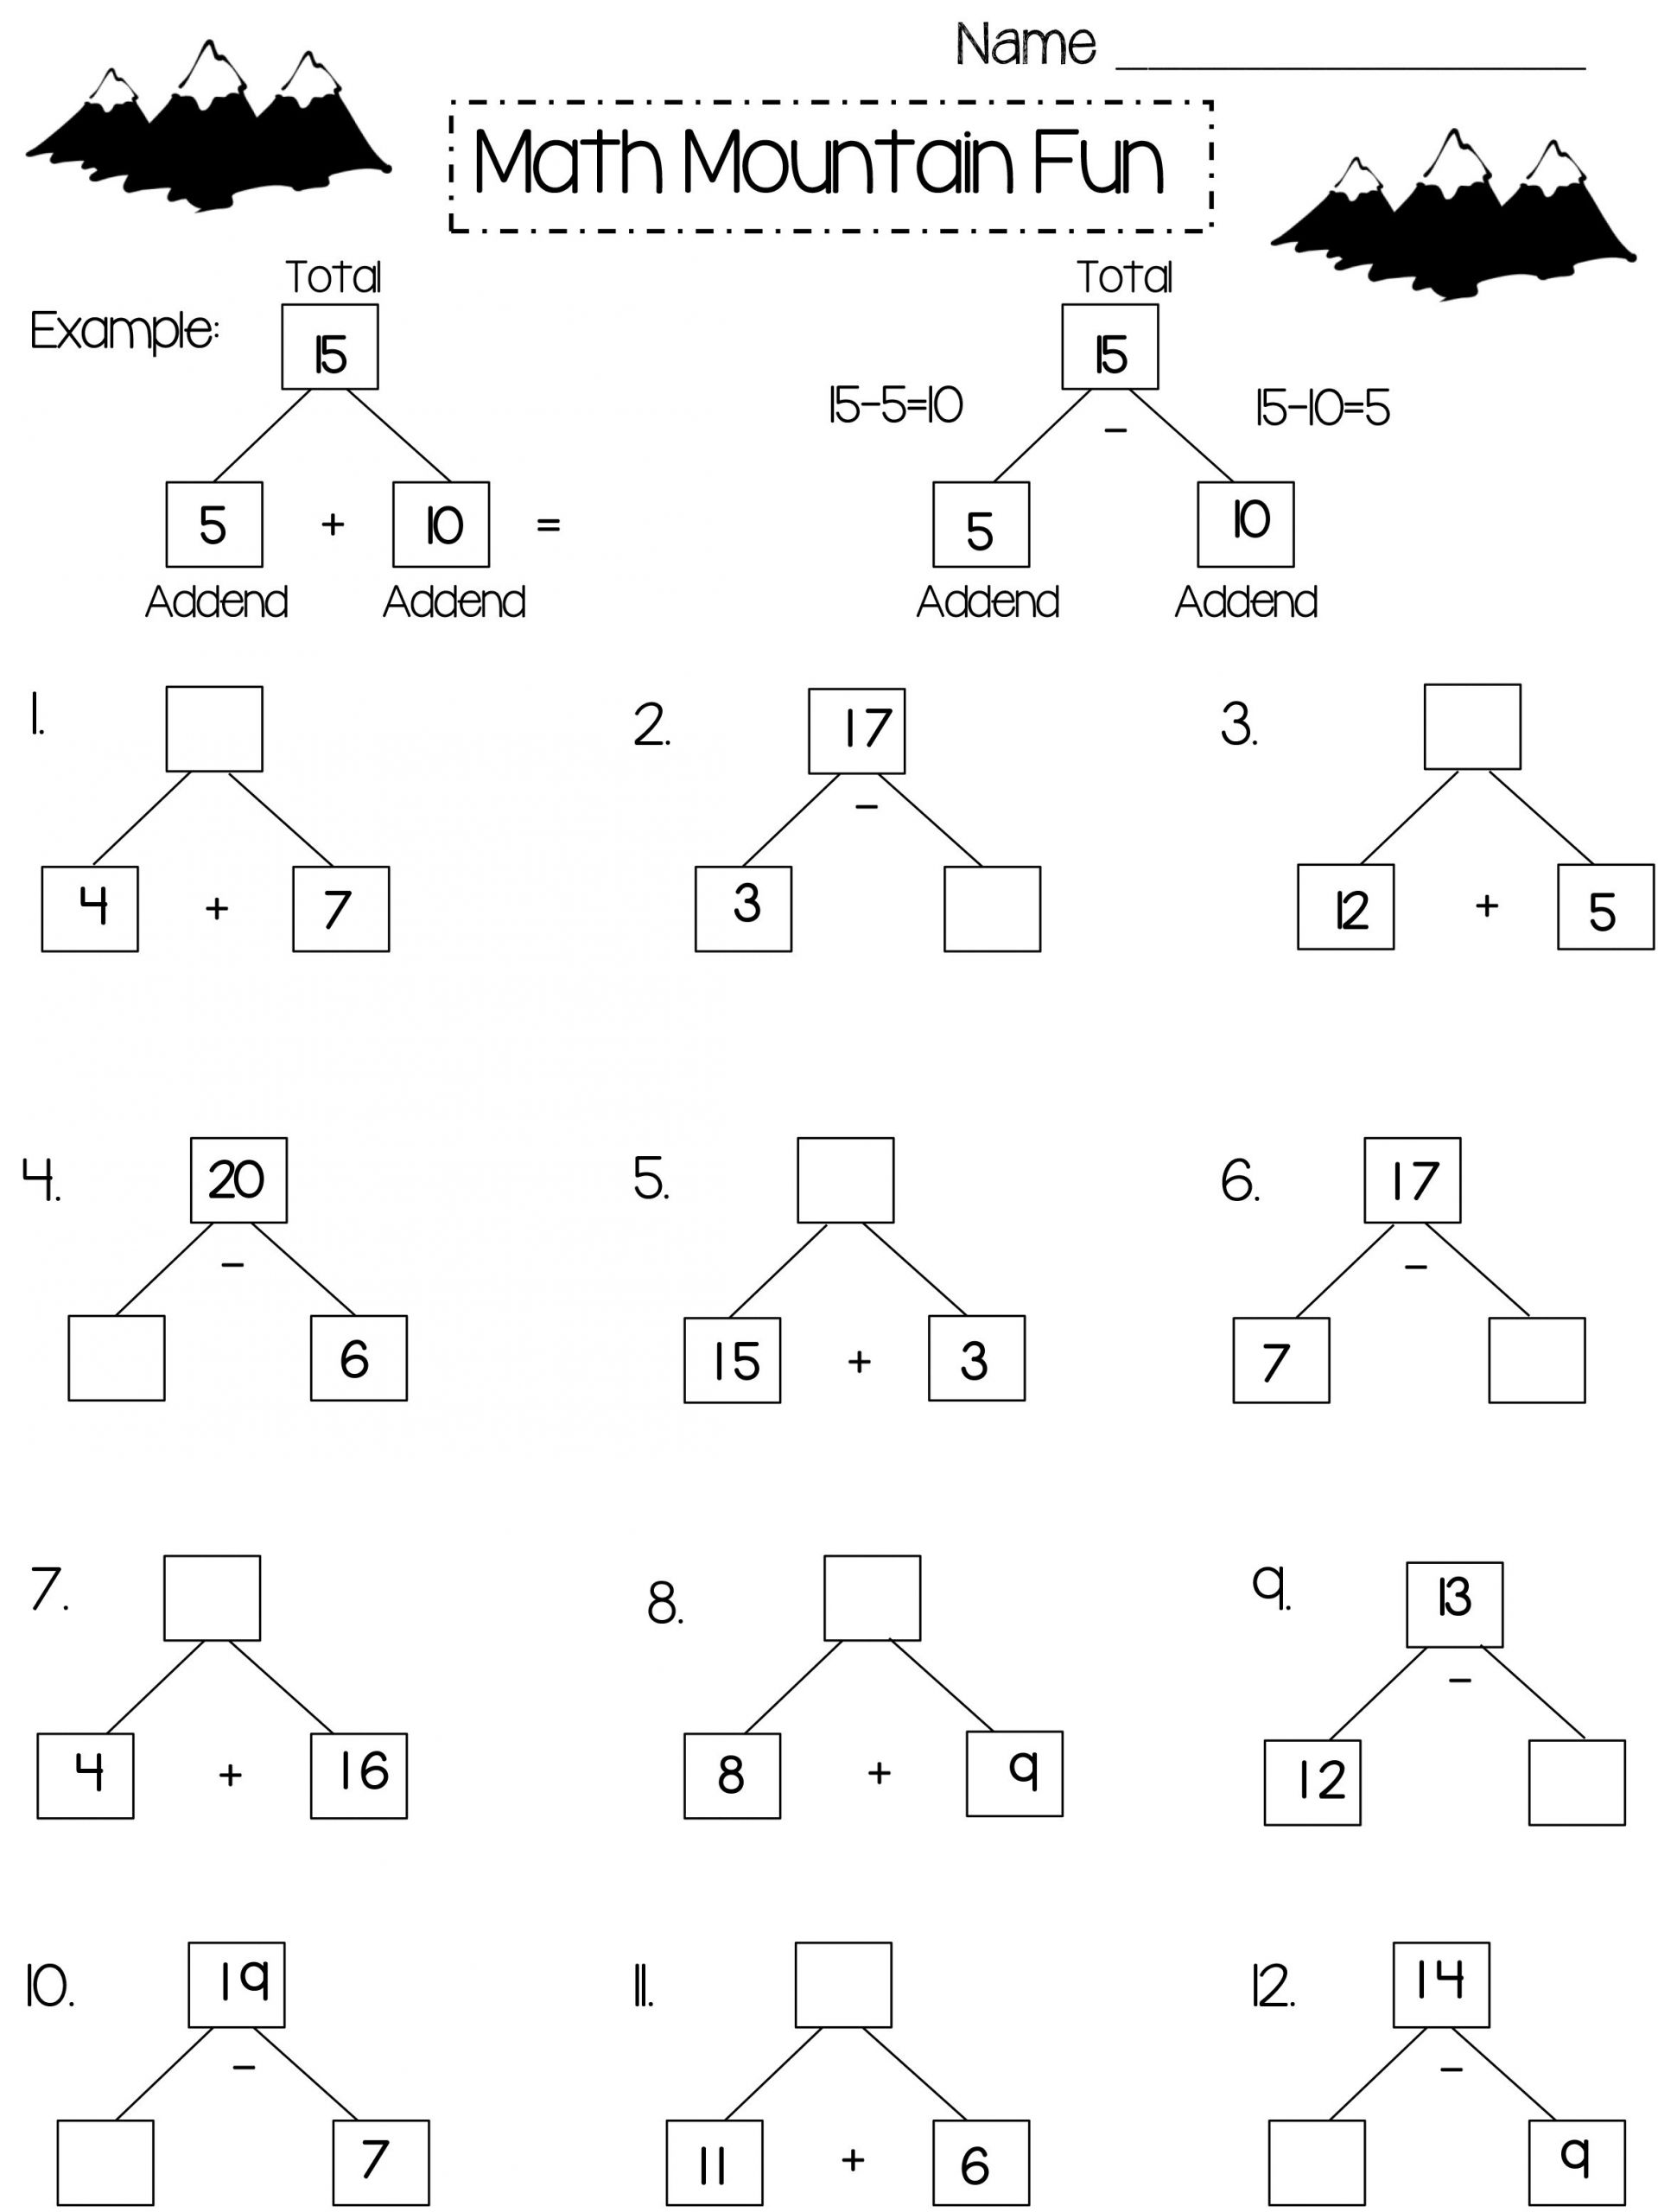 Free Math Worksheets Third Grade 3 Addition Adding 3 Digit and 1 Digit Numbers